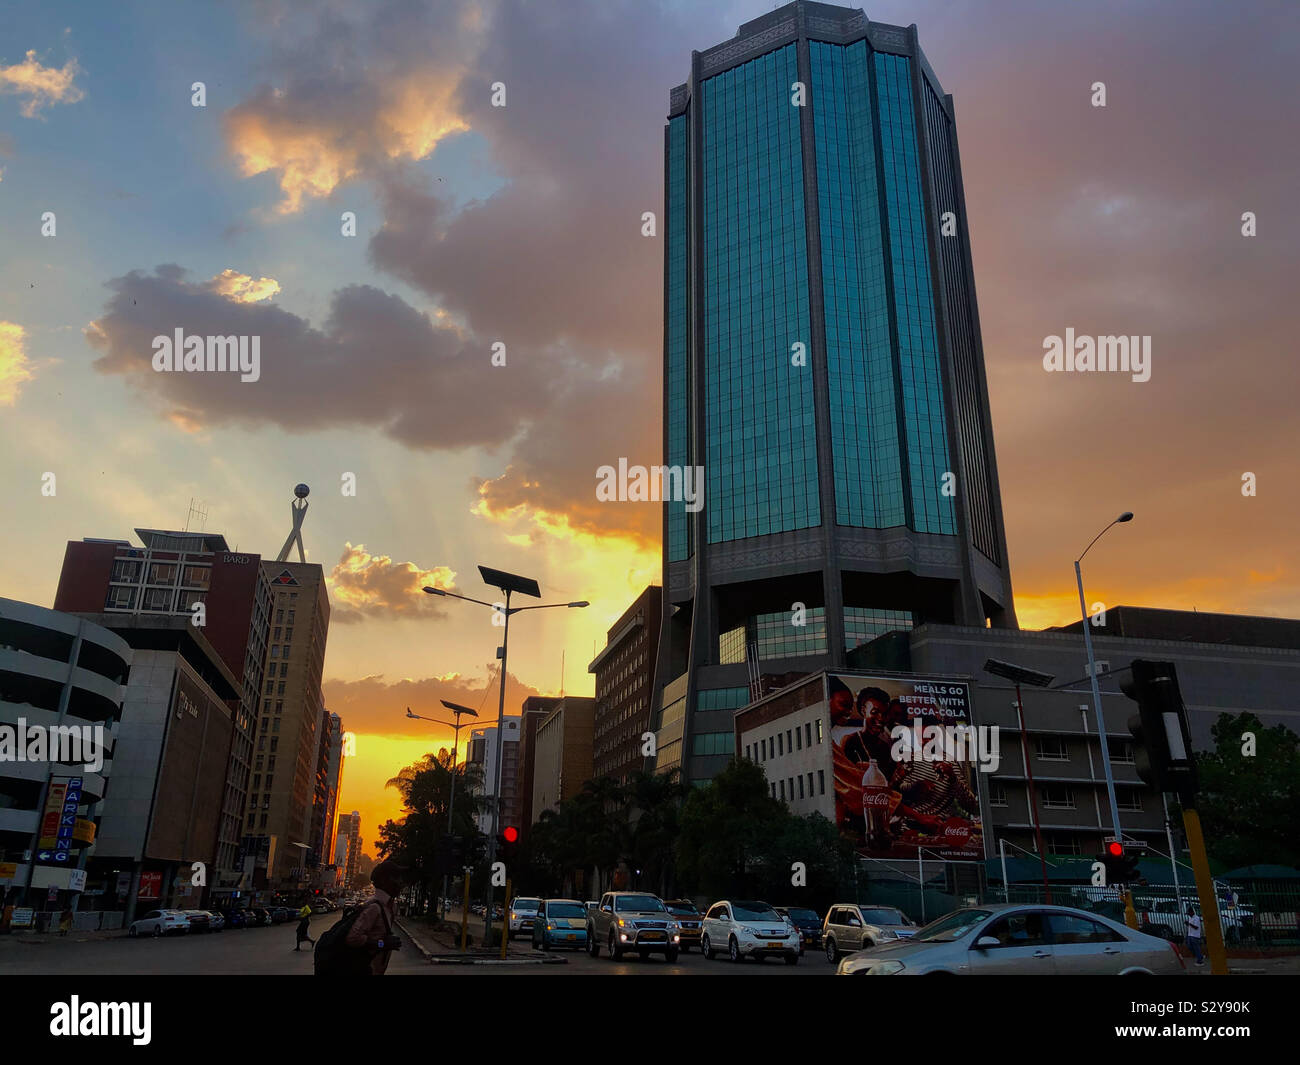 Streets and building of Harare Zimbabwe Stock Photo